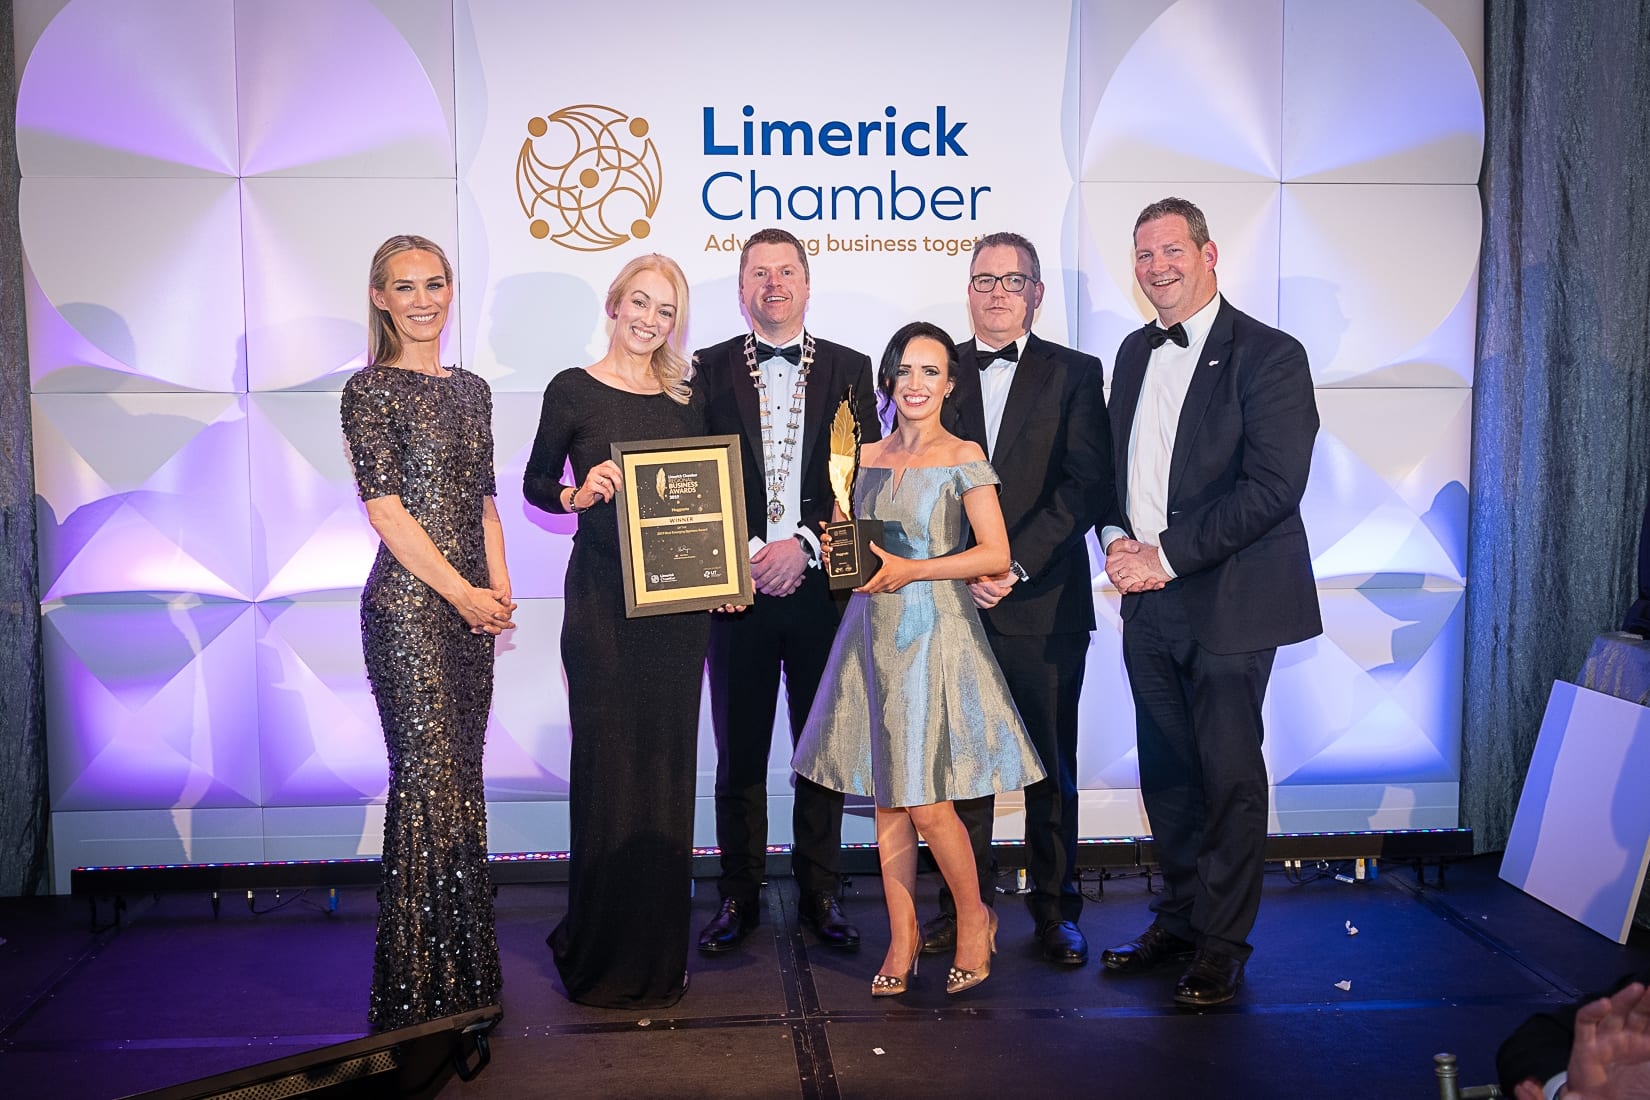 No repro fee-Limerick Chamber President’s Dinner
and Limerick Chamber Regional Business Awards 2019 which was held in the Strand Hotel on Friday 15th November /Best Emerging Business Award/  - From Left to Right: Dee Ryan - CEO Limerick Chamber, Jaiqui Meskell - WINNER/ Huggnote, Eoin Ryan - President Limerick Chamber, Perry Meskel - WINNER / Huggnote, Vincent Murray - Limerick Council / Sponsor, Dr Liam Browne - Vice President LIT / Sponsor. 
Photo credit Shauna Kennedy